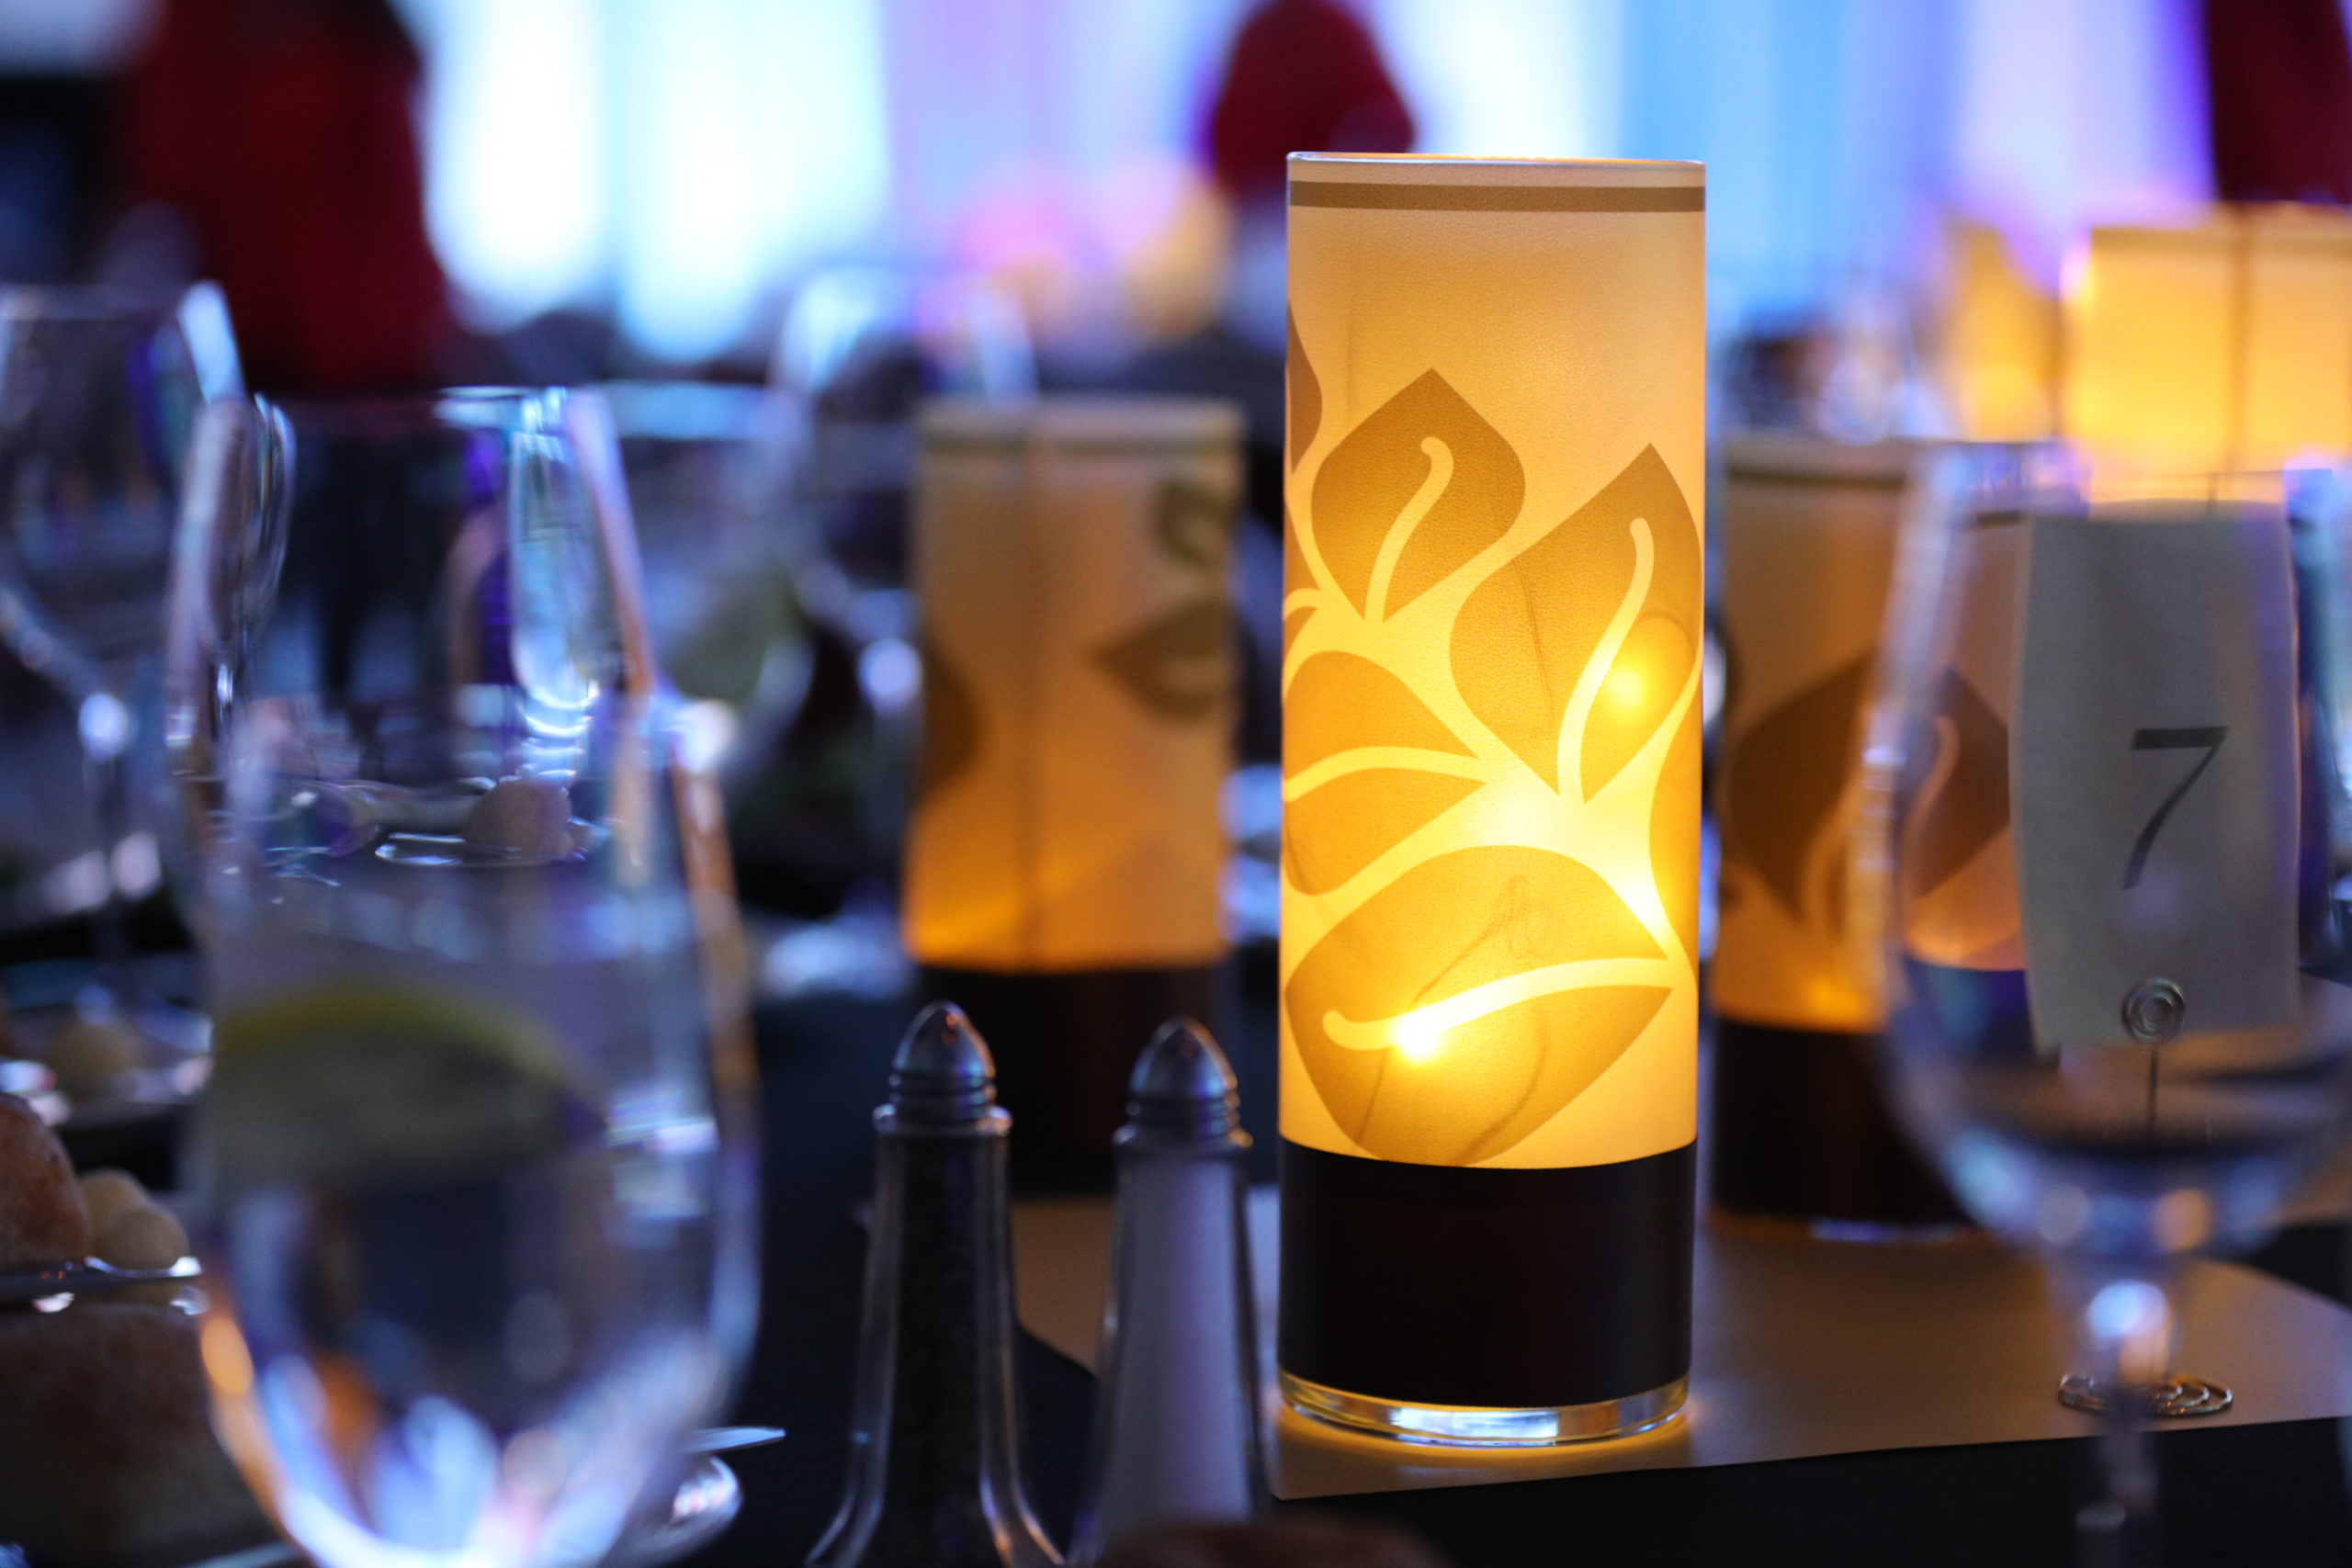 Table settings at New Hampshire's Starry Starry Night